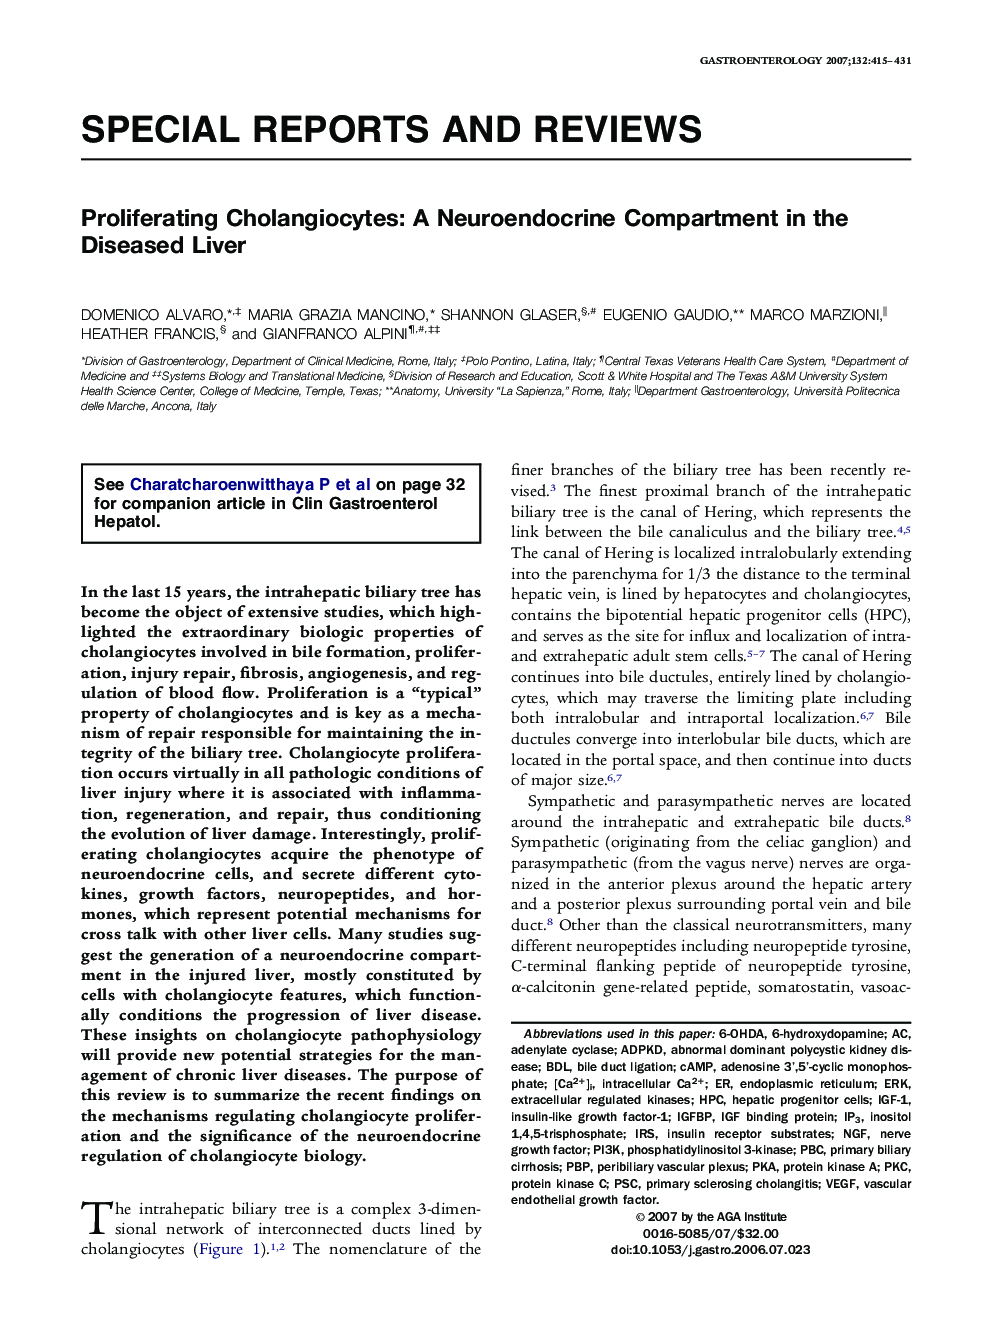 Proliferating Cholangiocytes: A Neuroendocrine Compartment in the Diseased Liver 